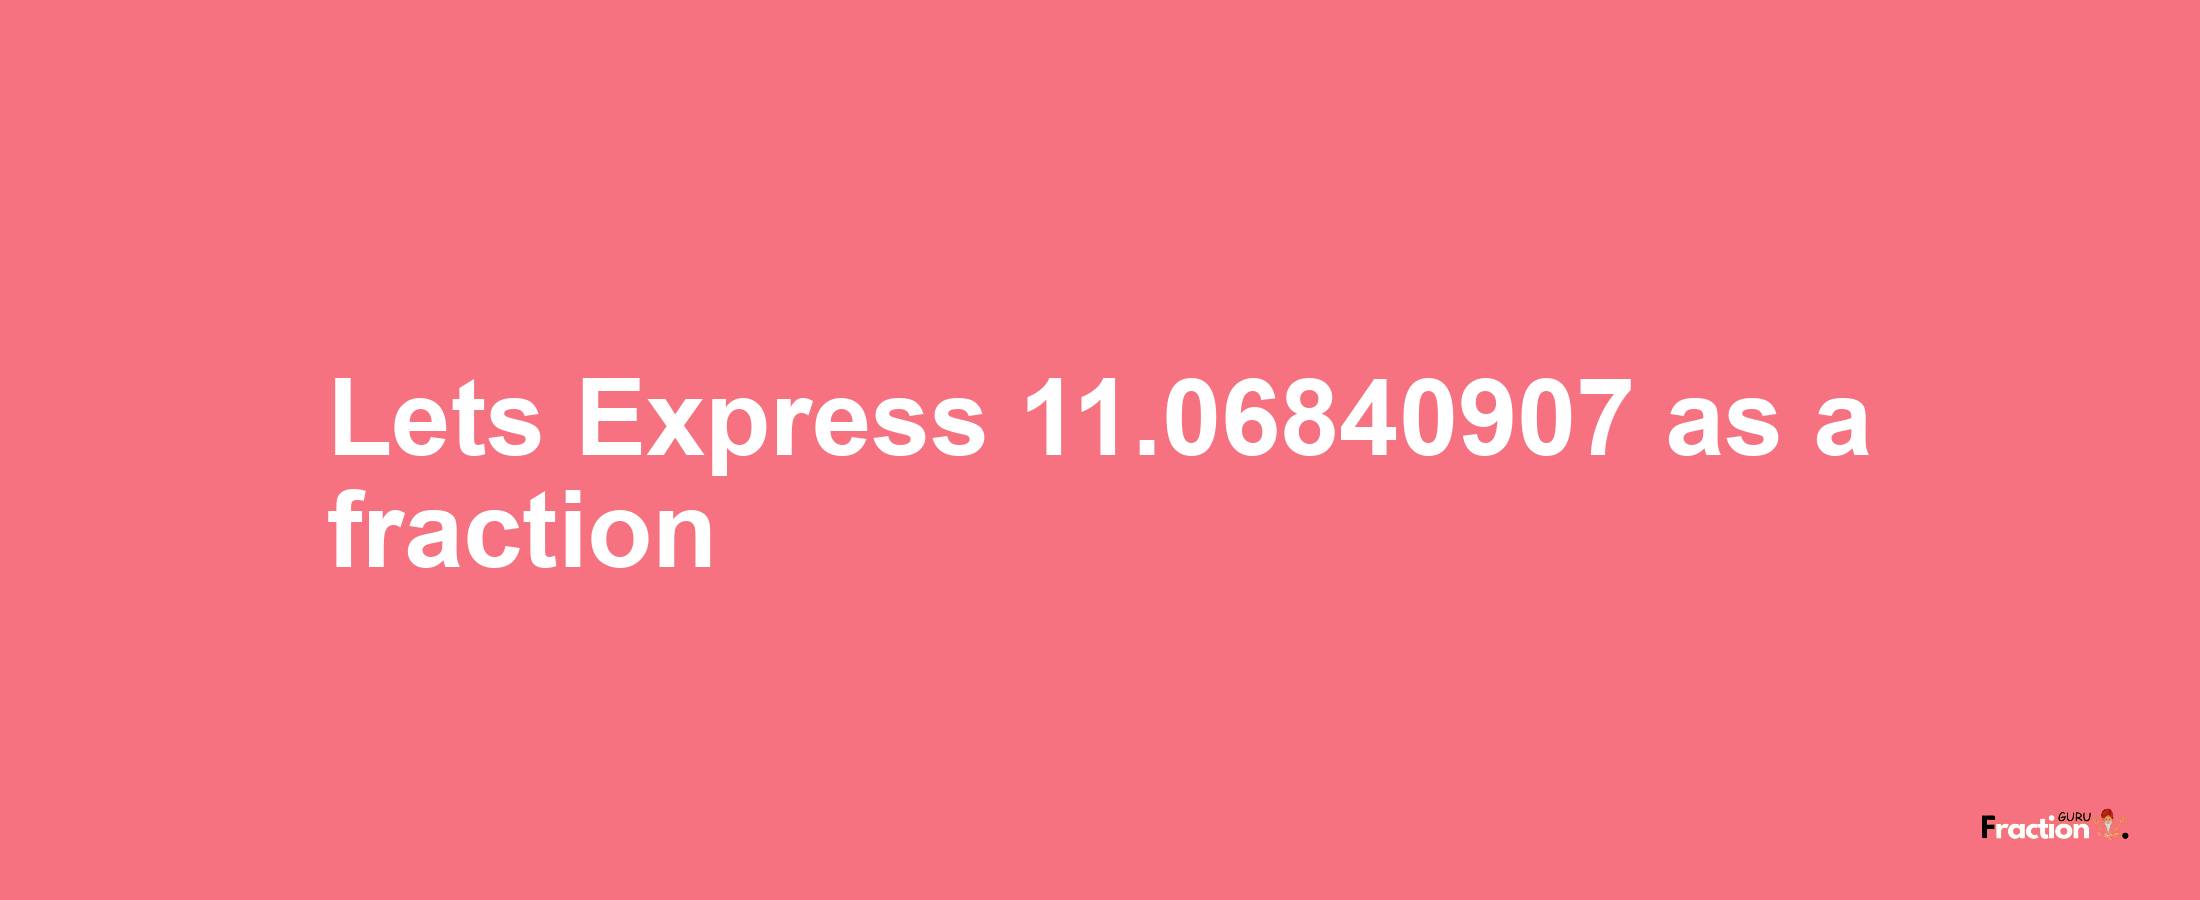 Lets Express 11.06840907 as afraction